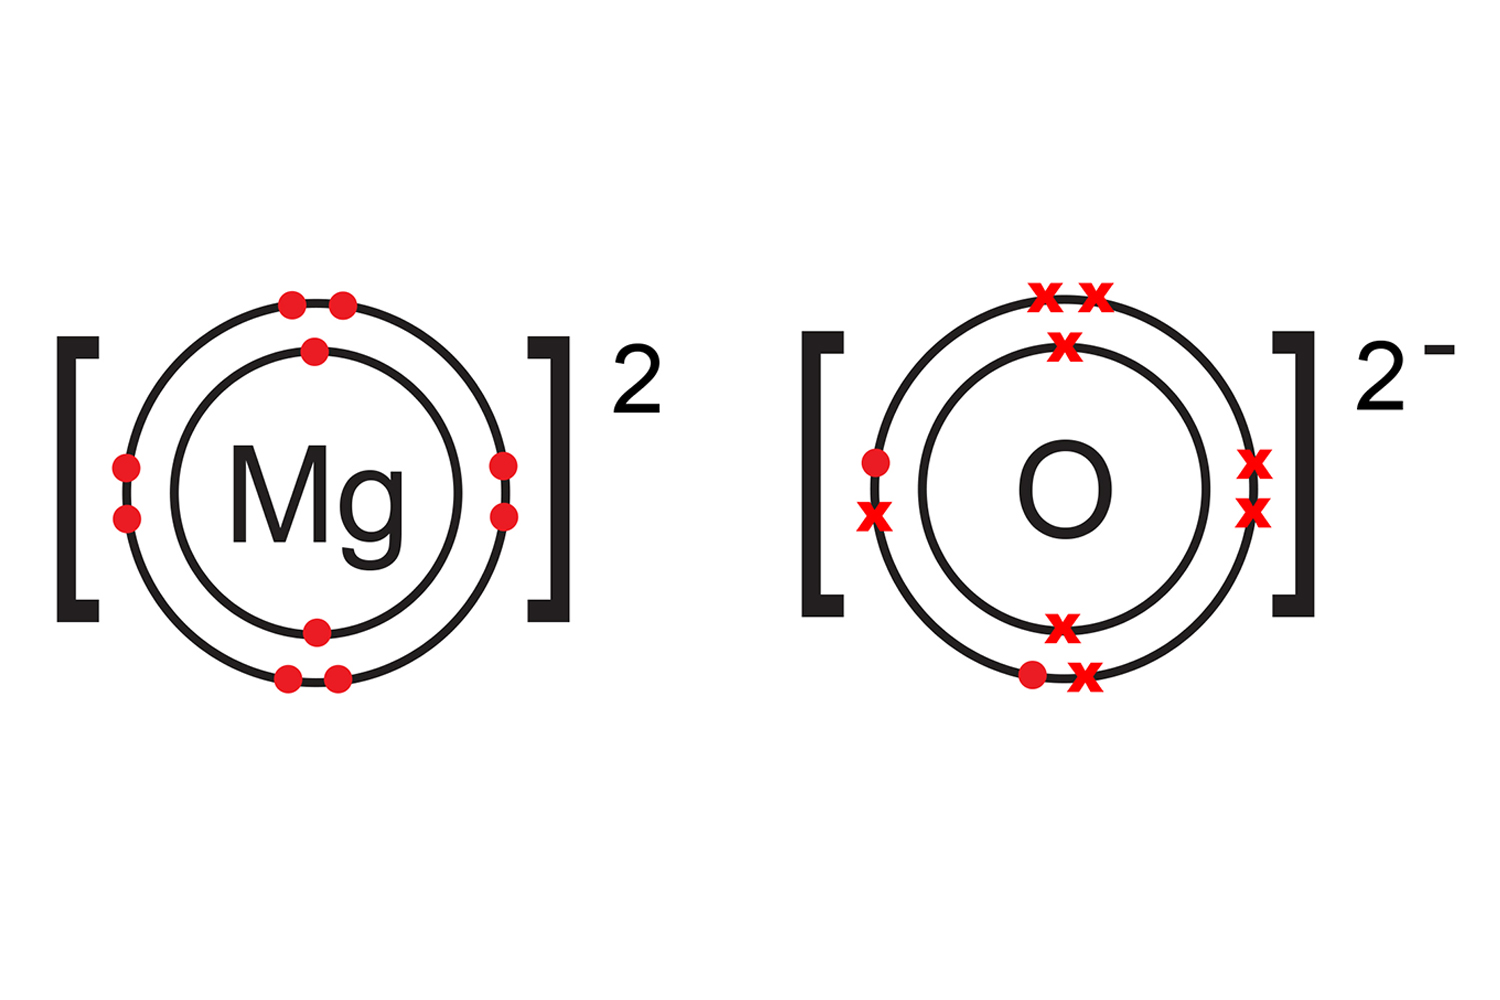 Magnesium is now positive so it is Mg2+ and oxygen is negatively charged so it is an Oxide ion O2-